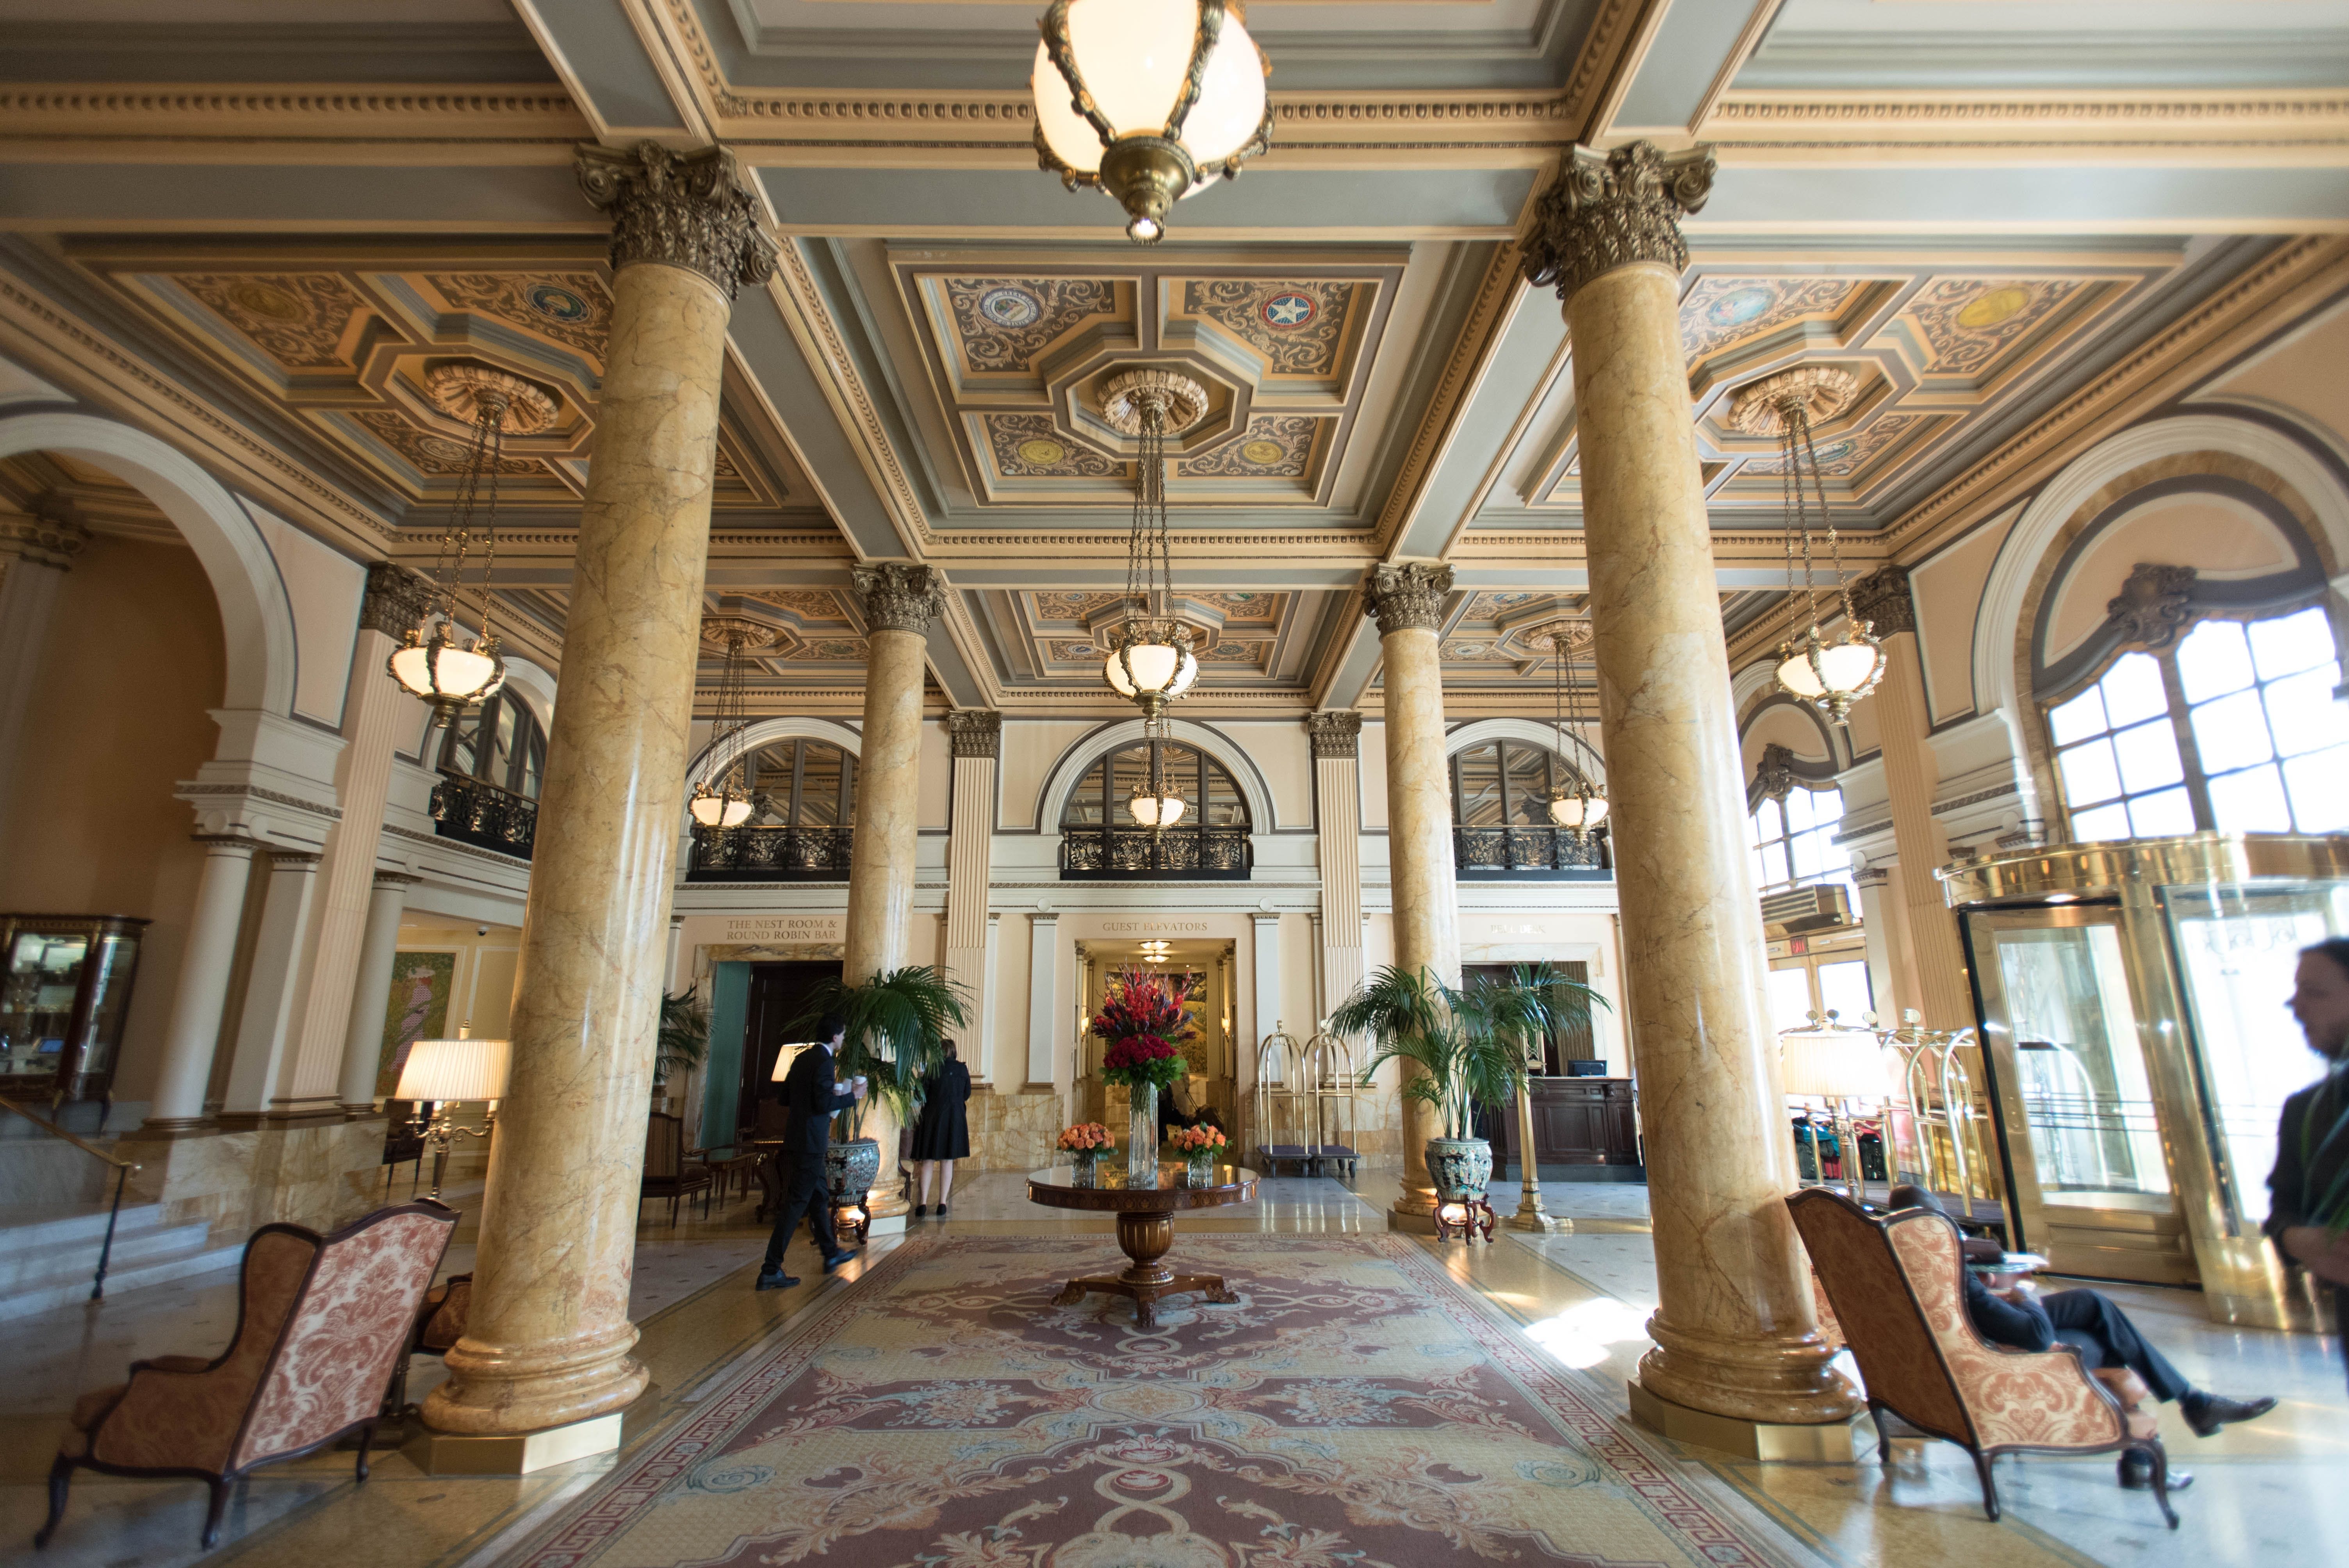 11 hotels favored by U.S. presidents